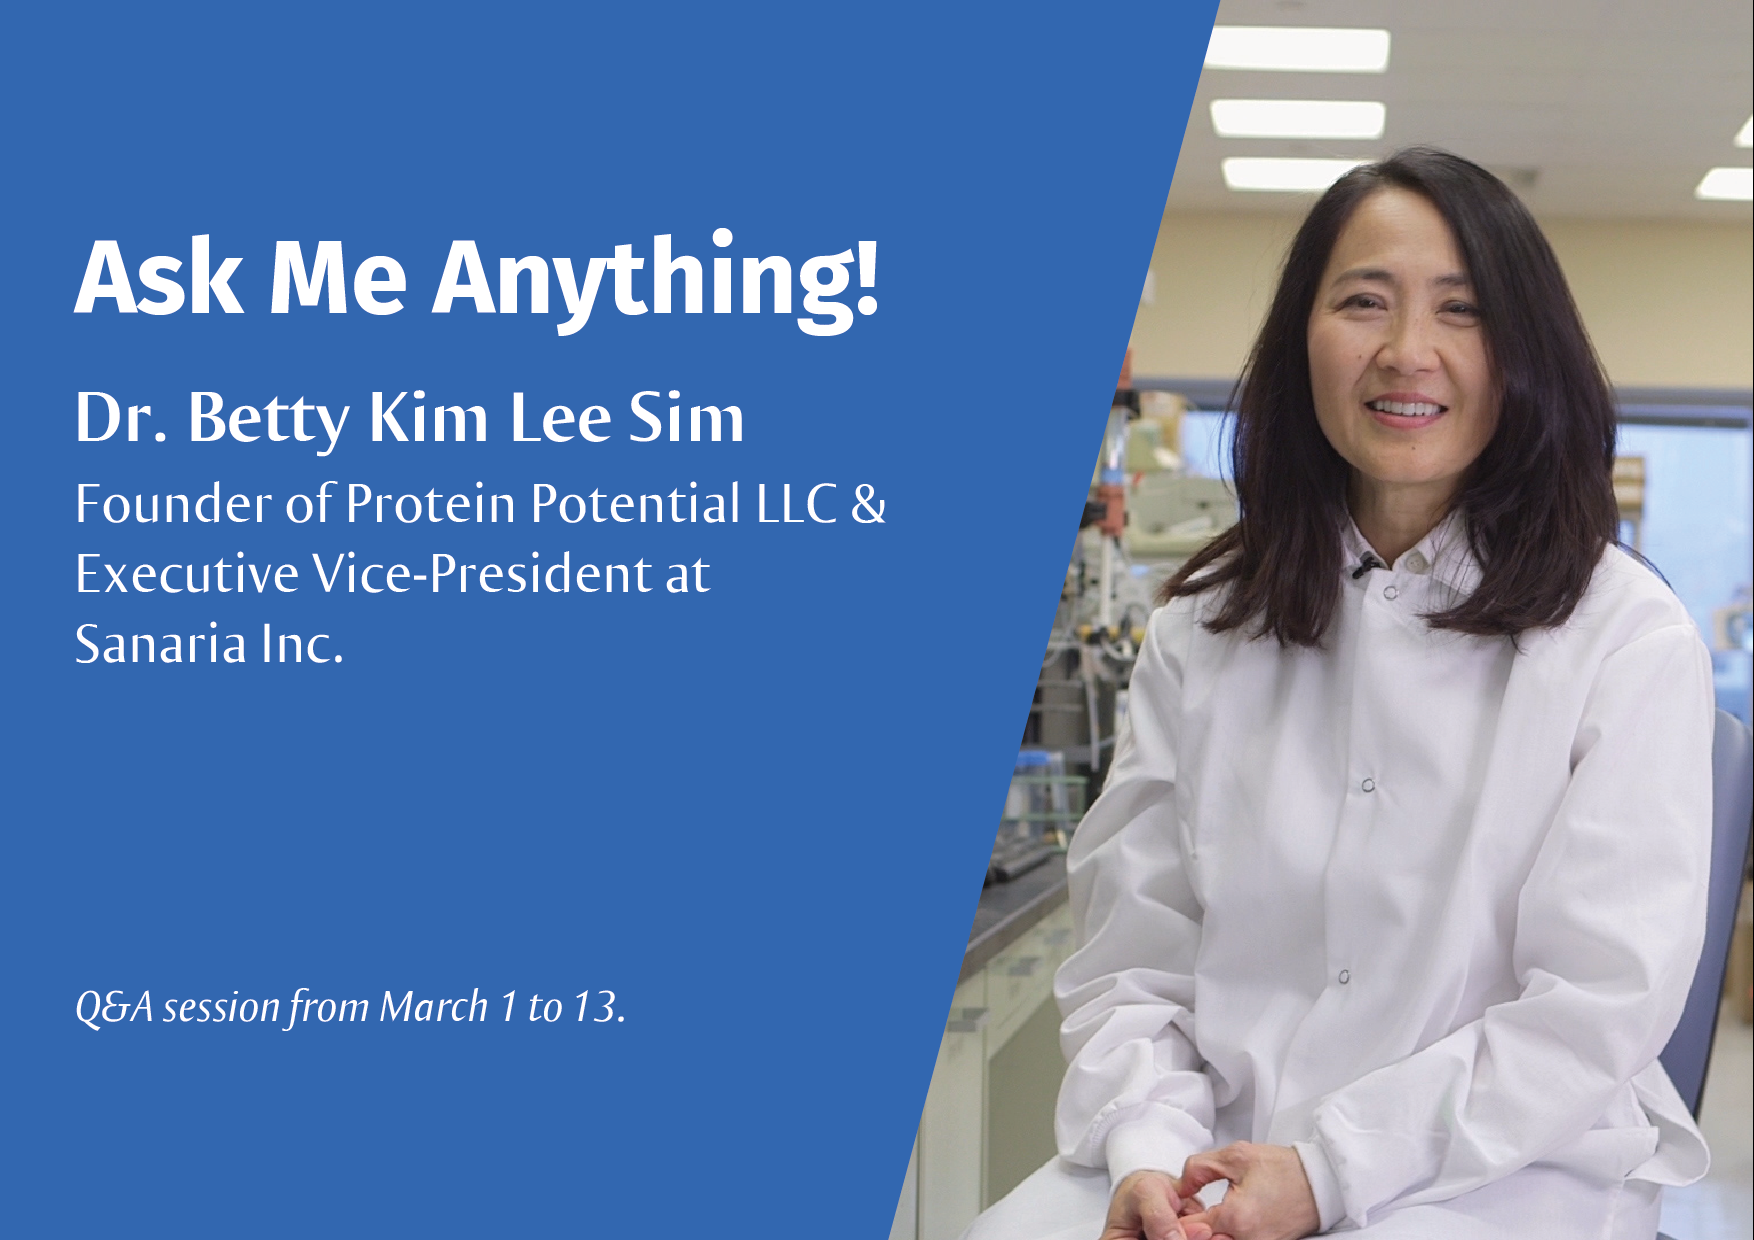 Ask Me Anything (AMA) session: Dr Betty Kim Lee Sim